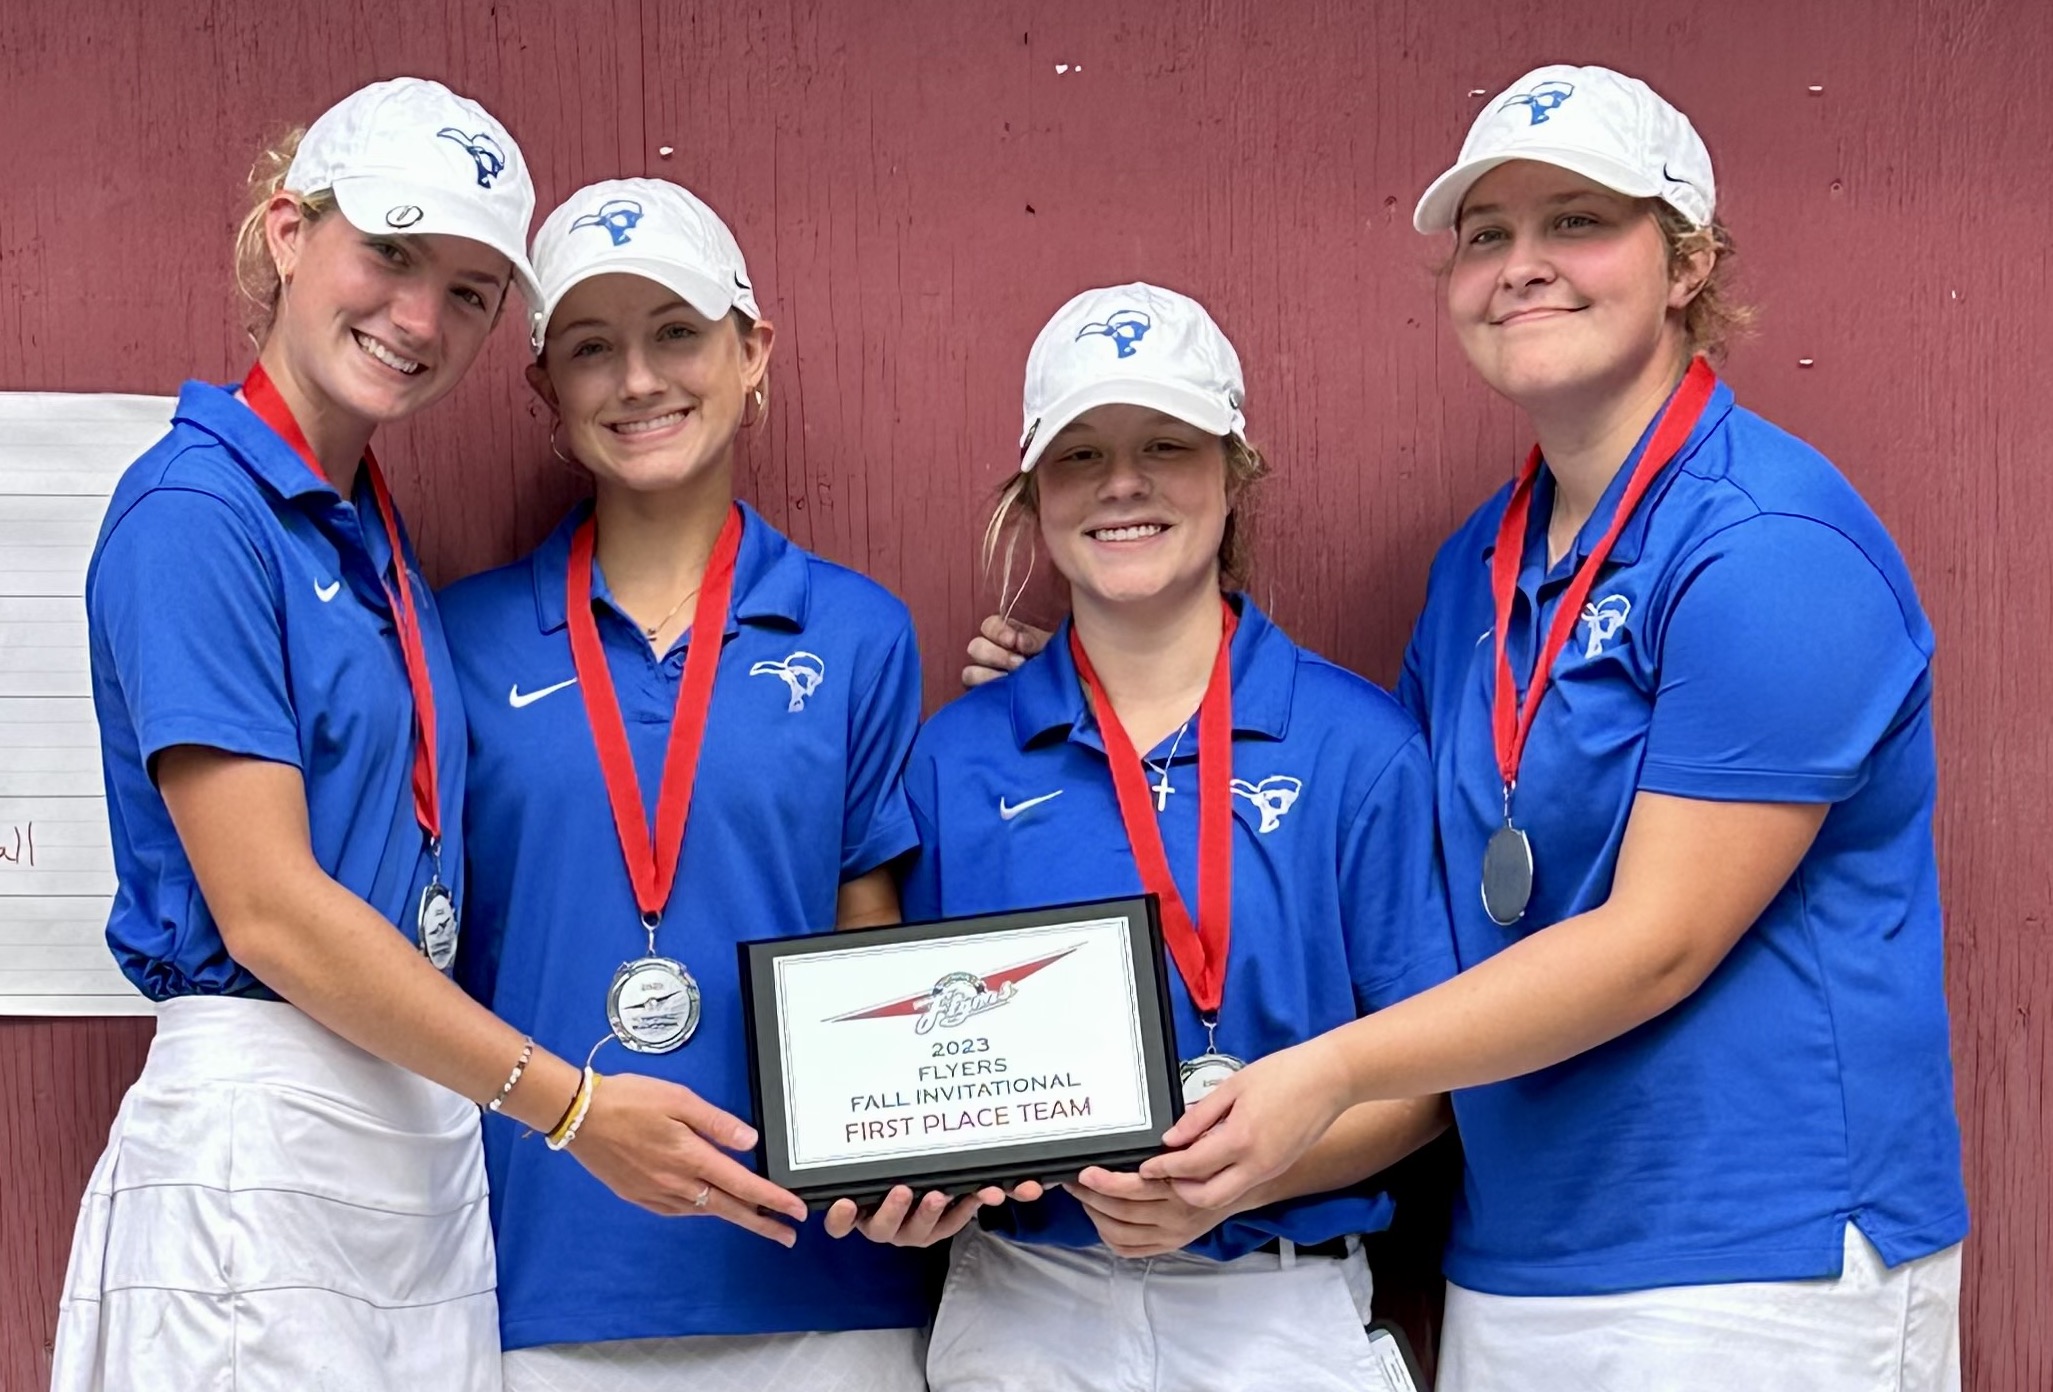 Women's Golf Take Home First Place at the Sandhills Fall Intercollegiate